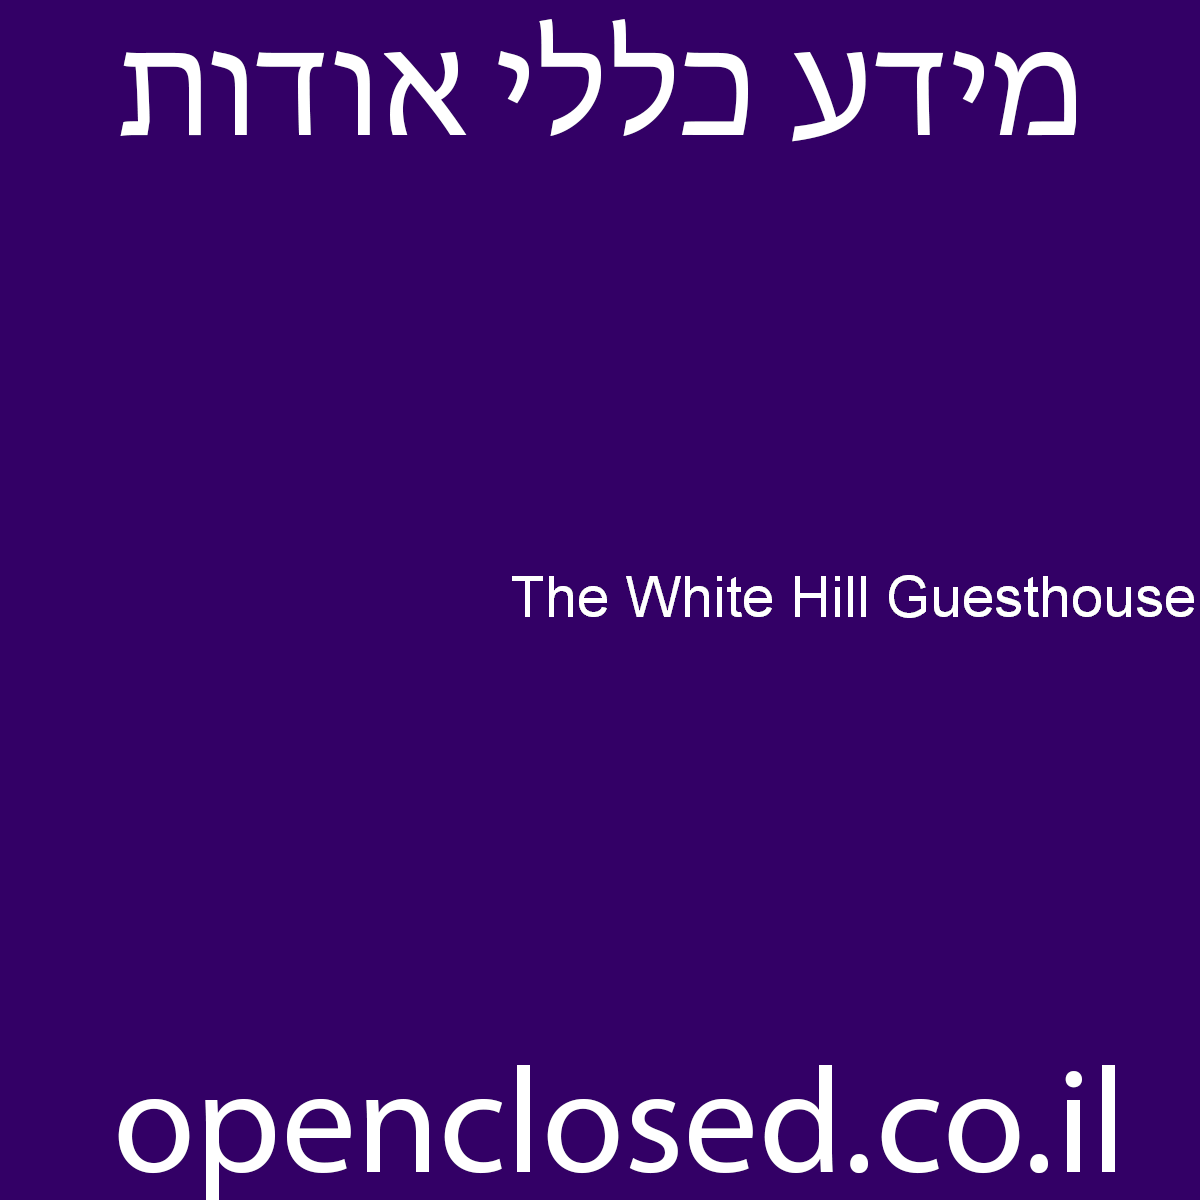 The White Hill Guesthouse